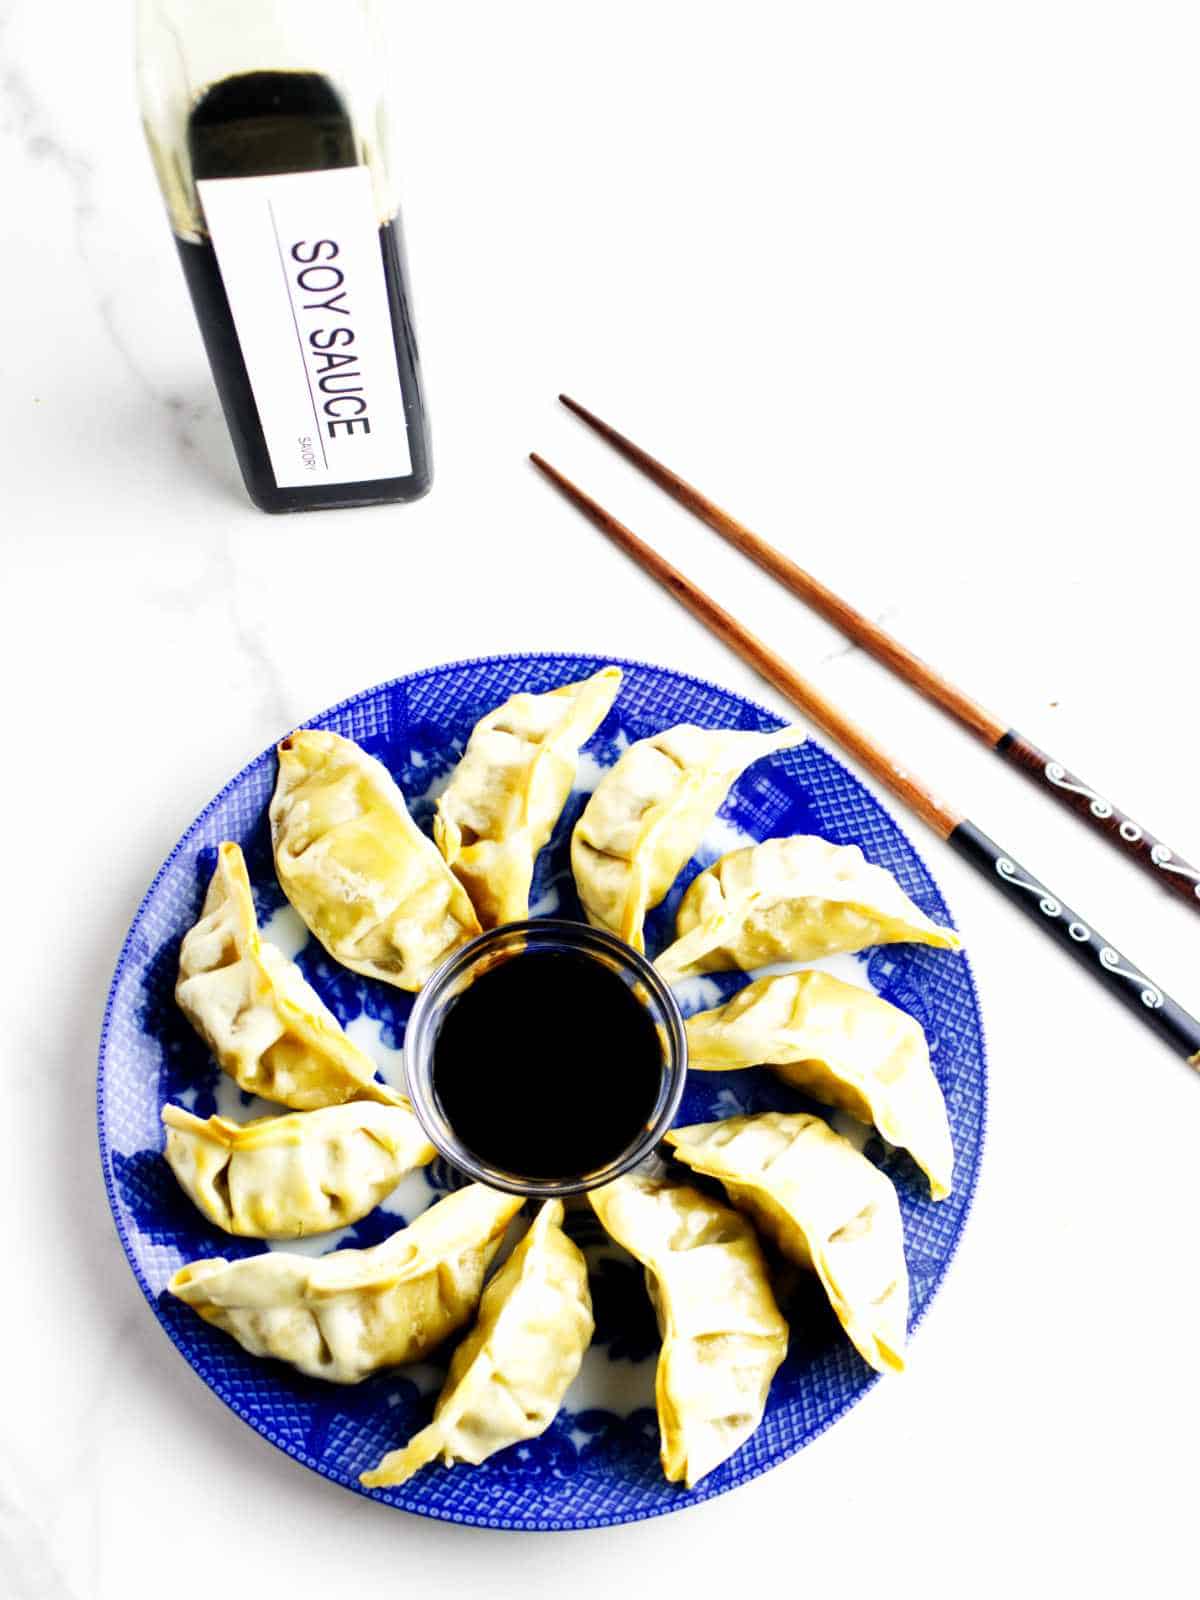 platter full of air fried pot stickers with soy sauce dip in the middle and chop sticks nearby.